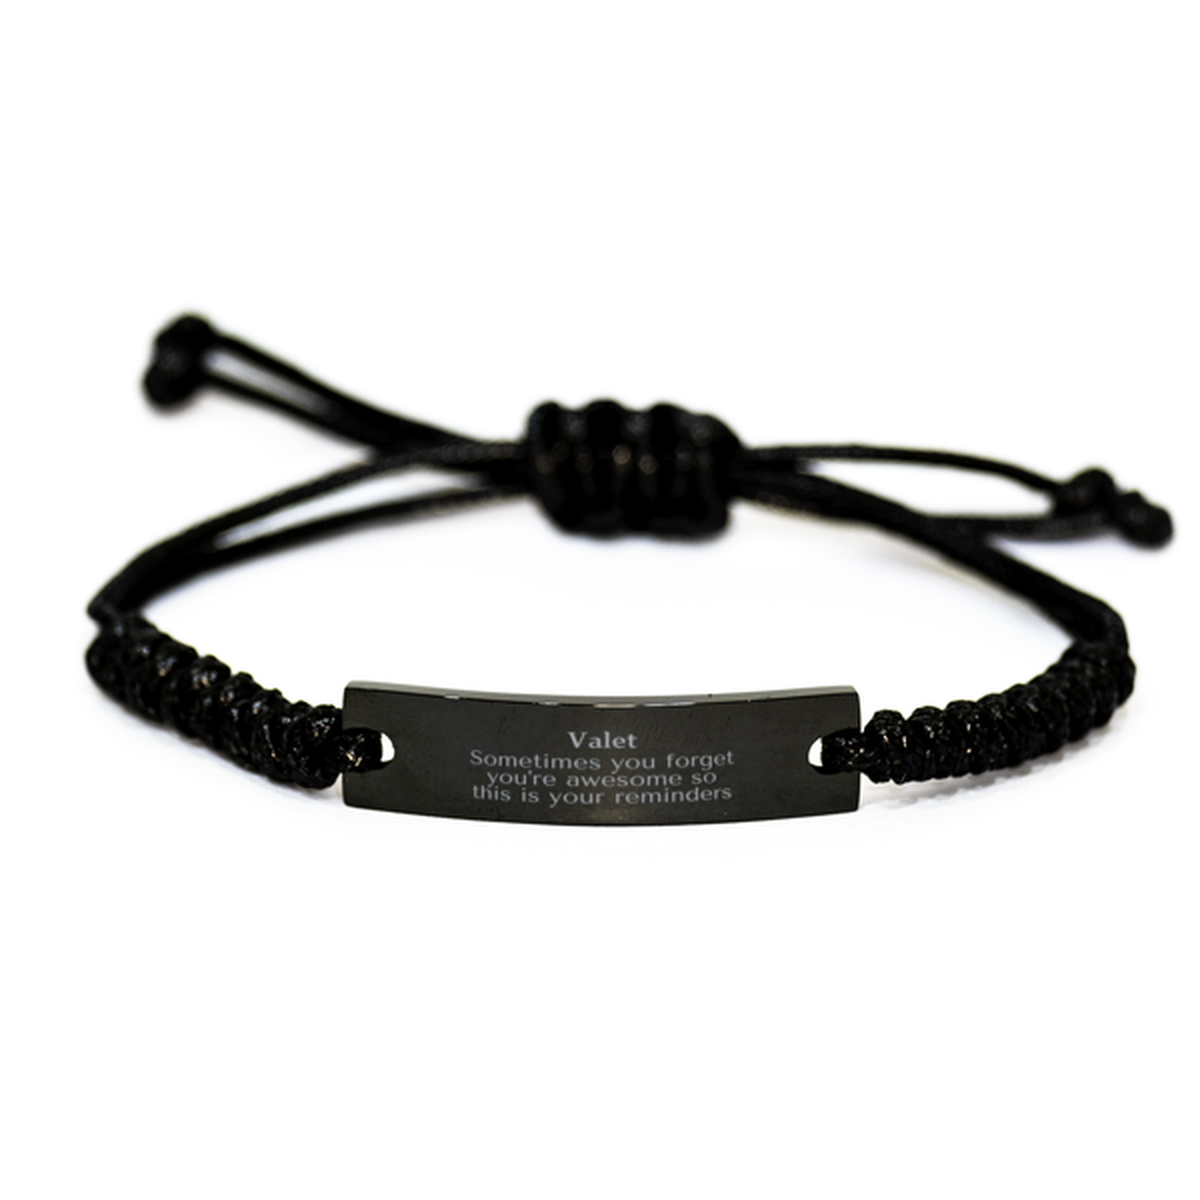 Sentimental Valet Black Rope Bracelet, Valet Sometimes you forget you're awesome so this is your reminders, Graduation Christmas Birthday Gifts for Valet, Men, Women, Coworkers